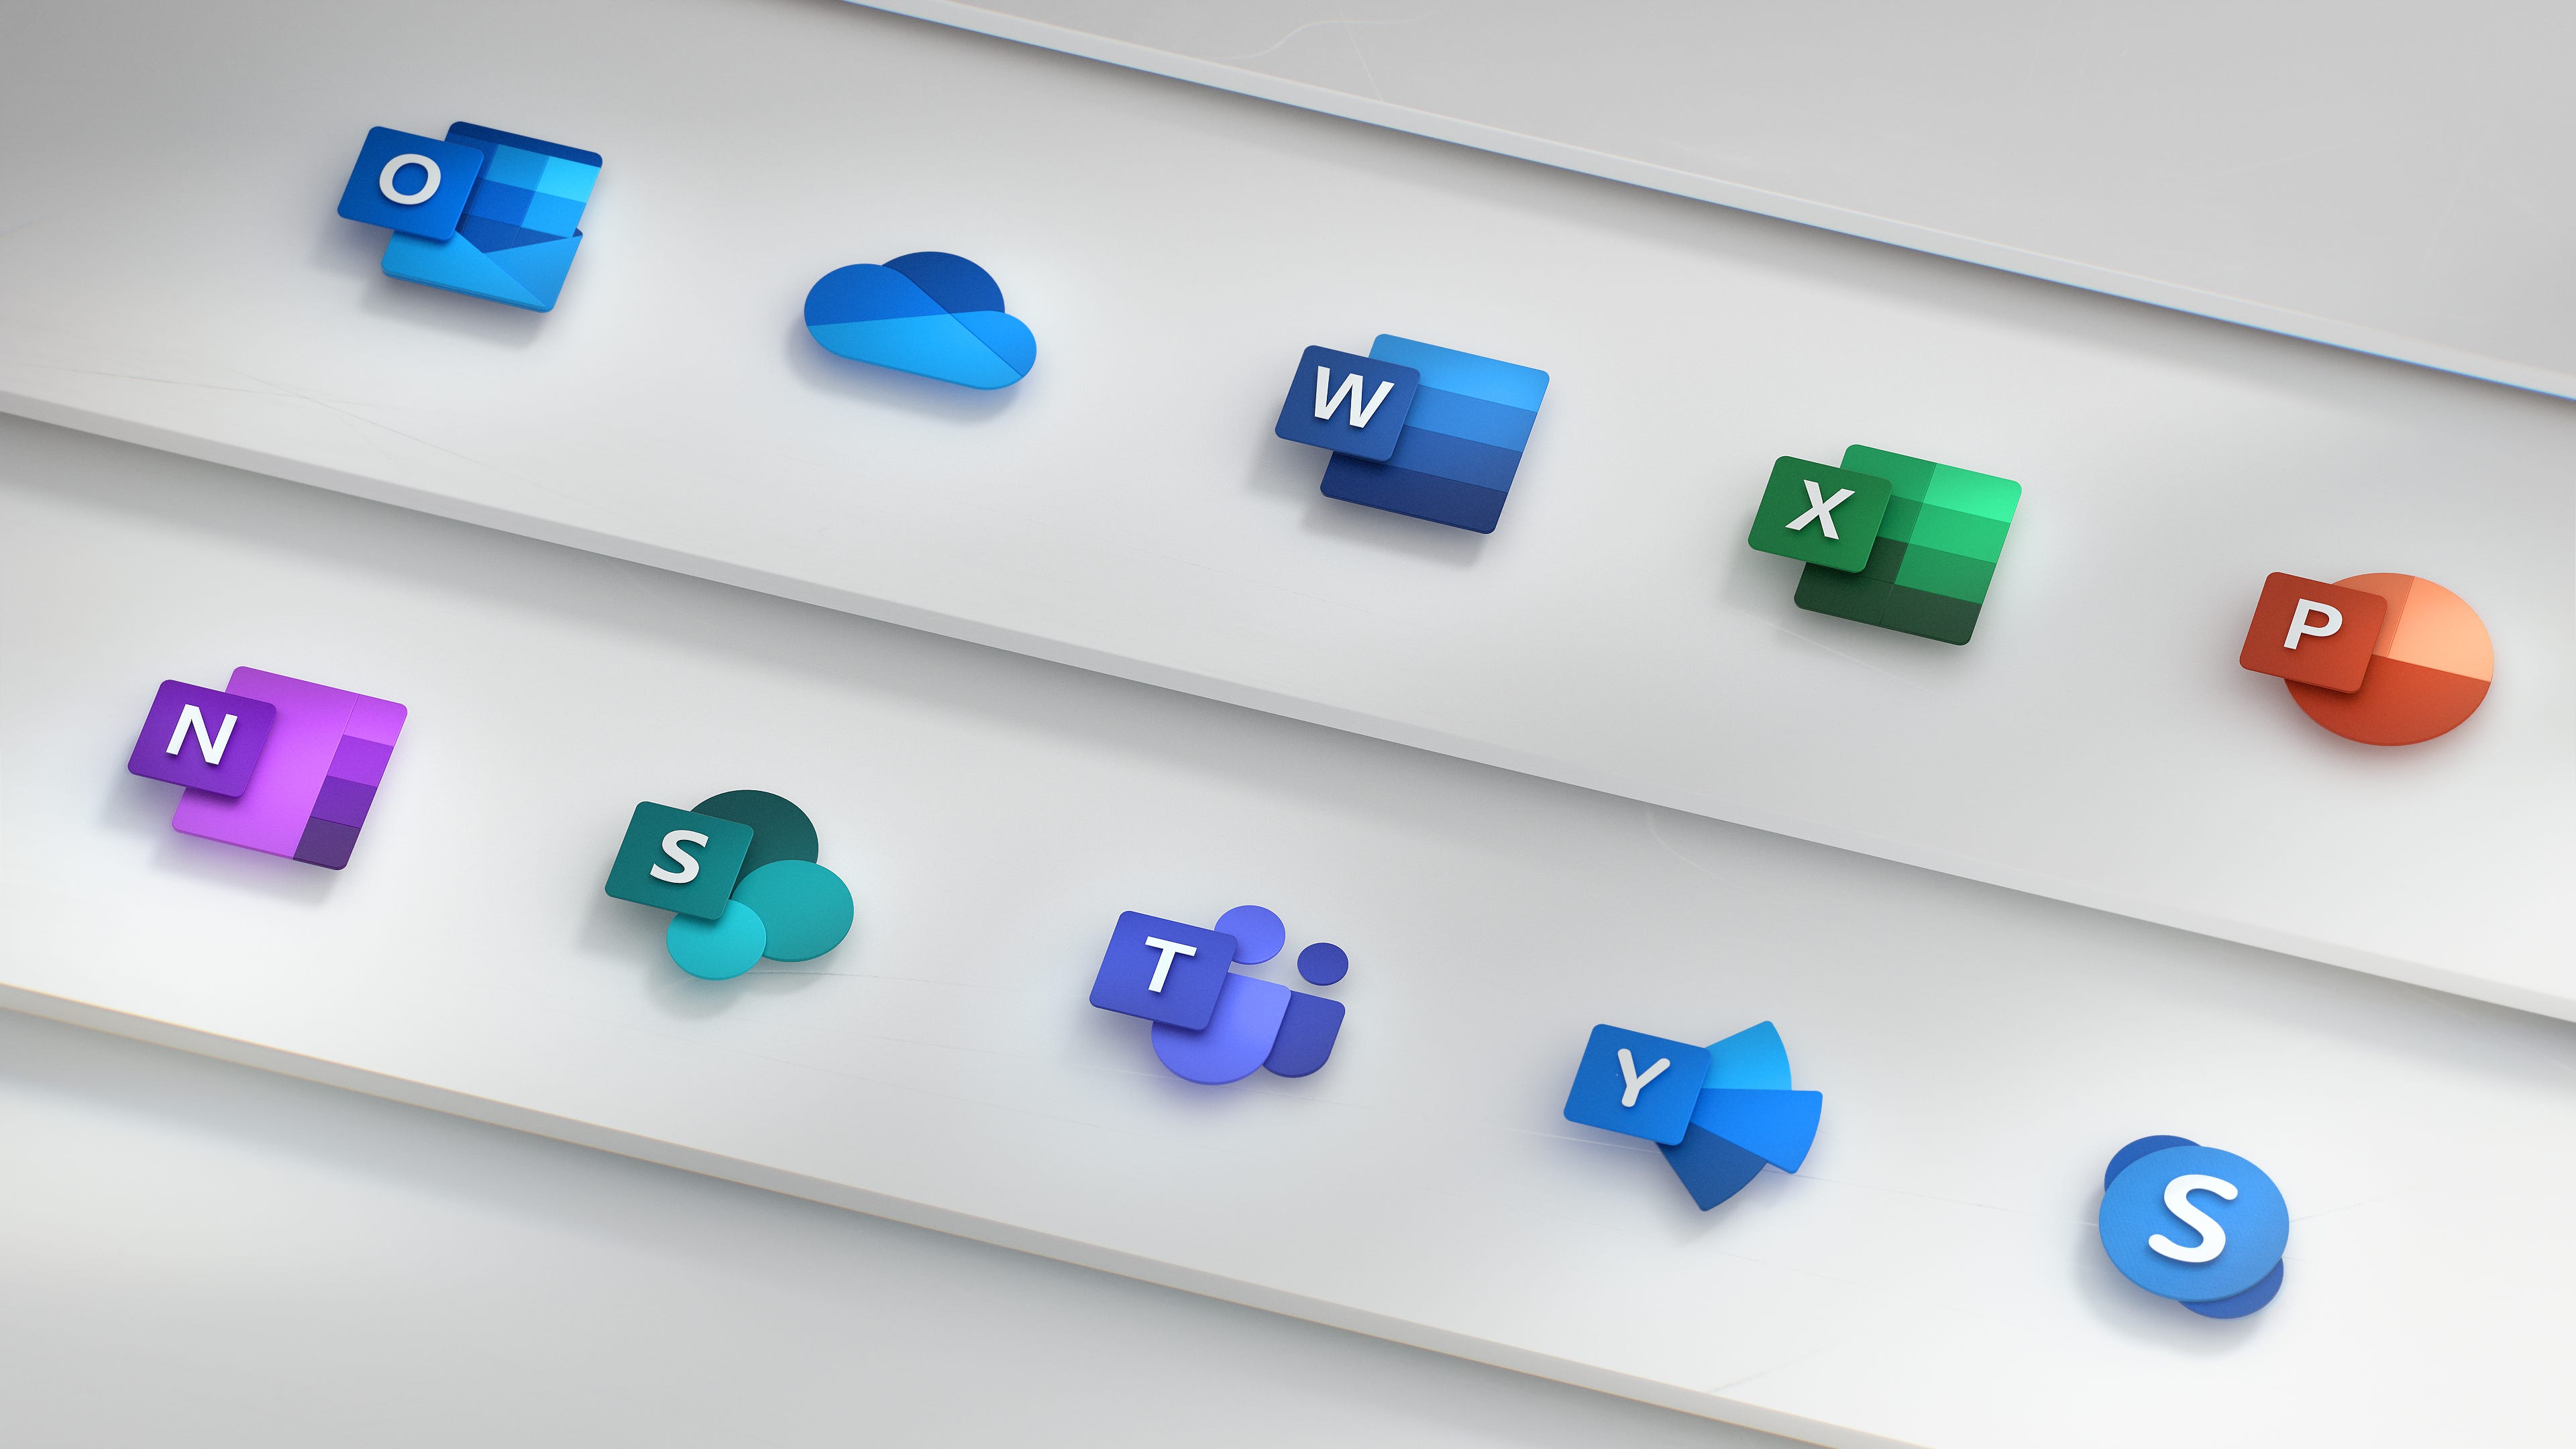 Redesigning the Office App Icons to Embrace a New World of Work, by Jon  Friedman, Microsoft Design